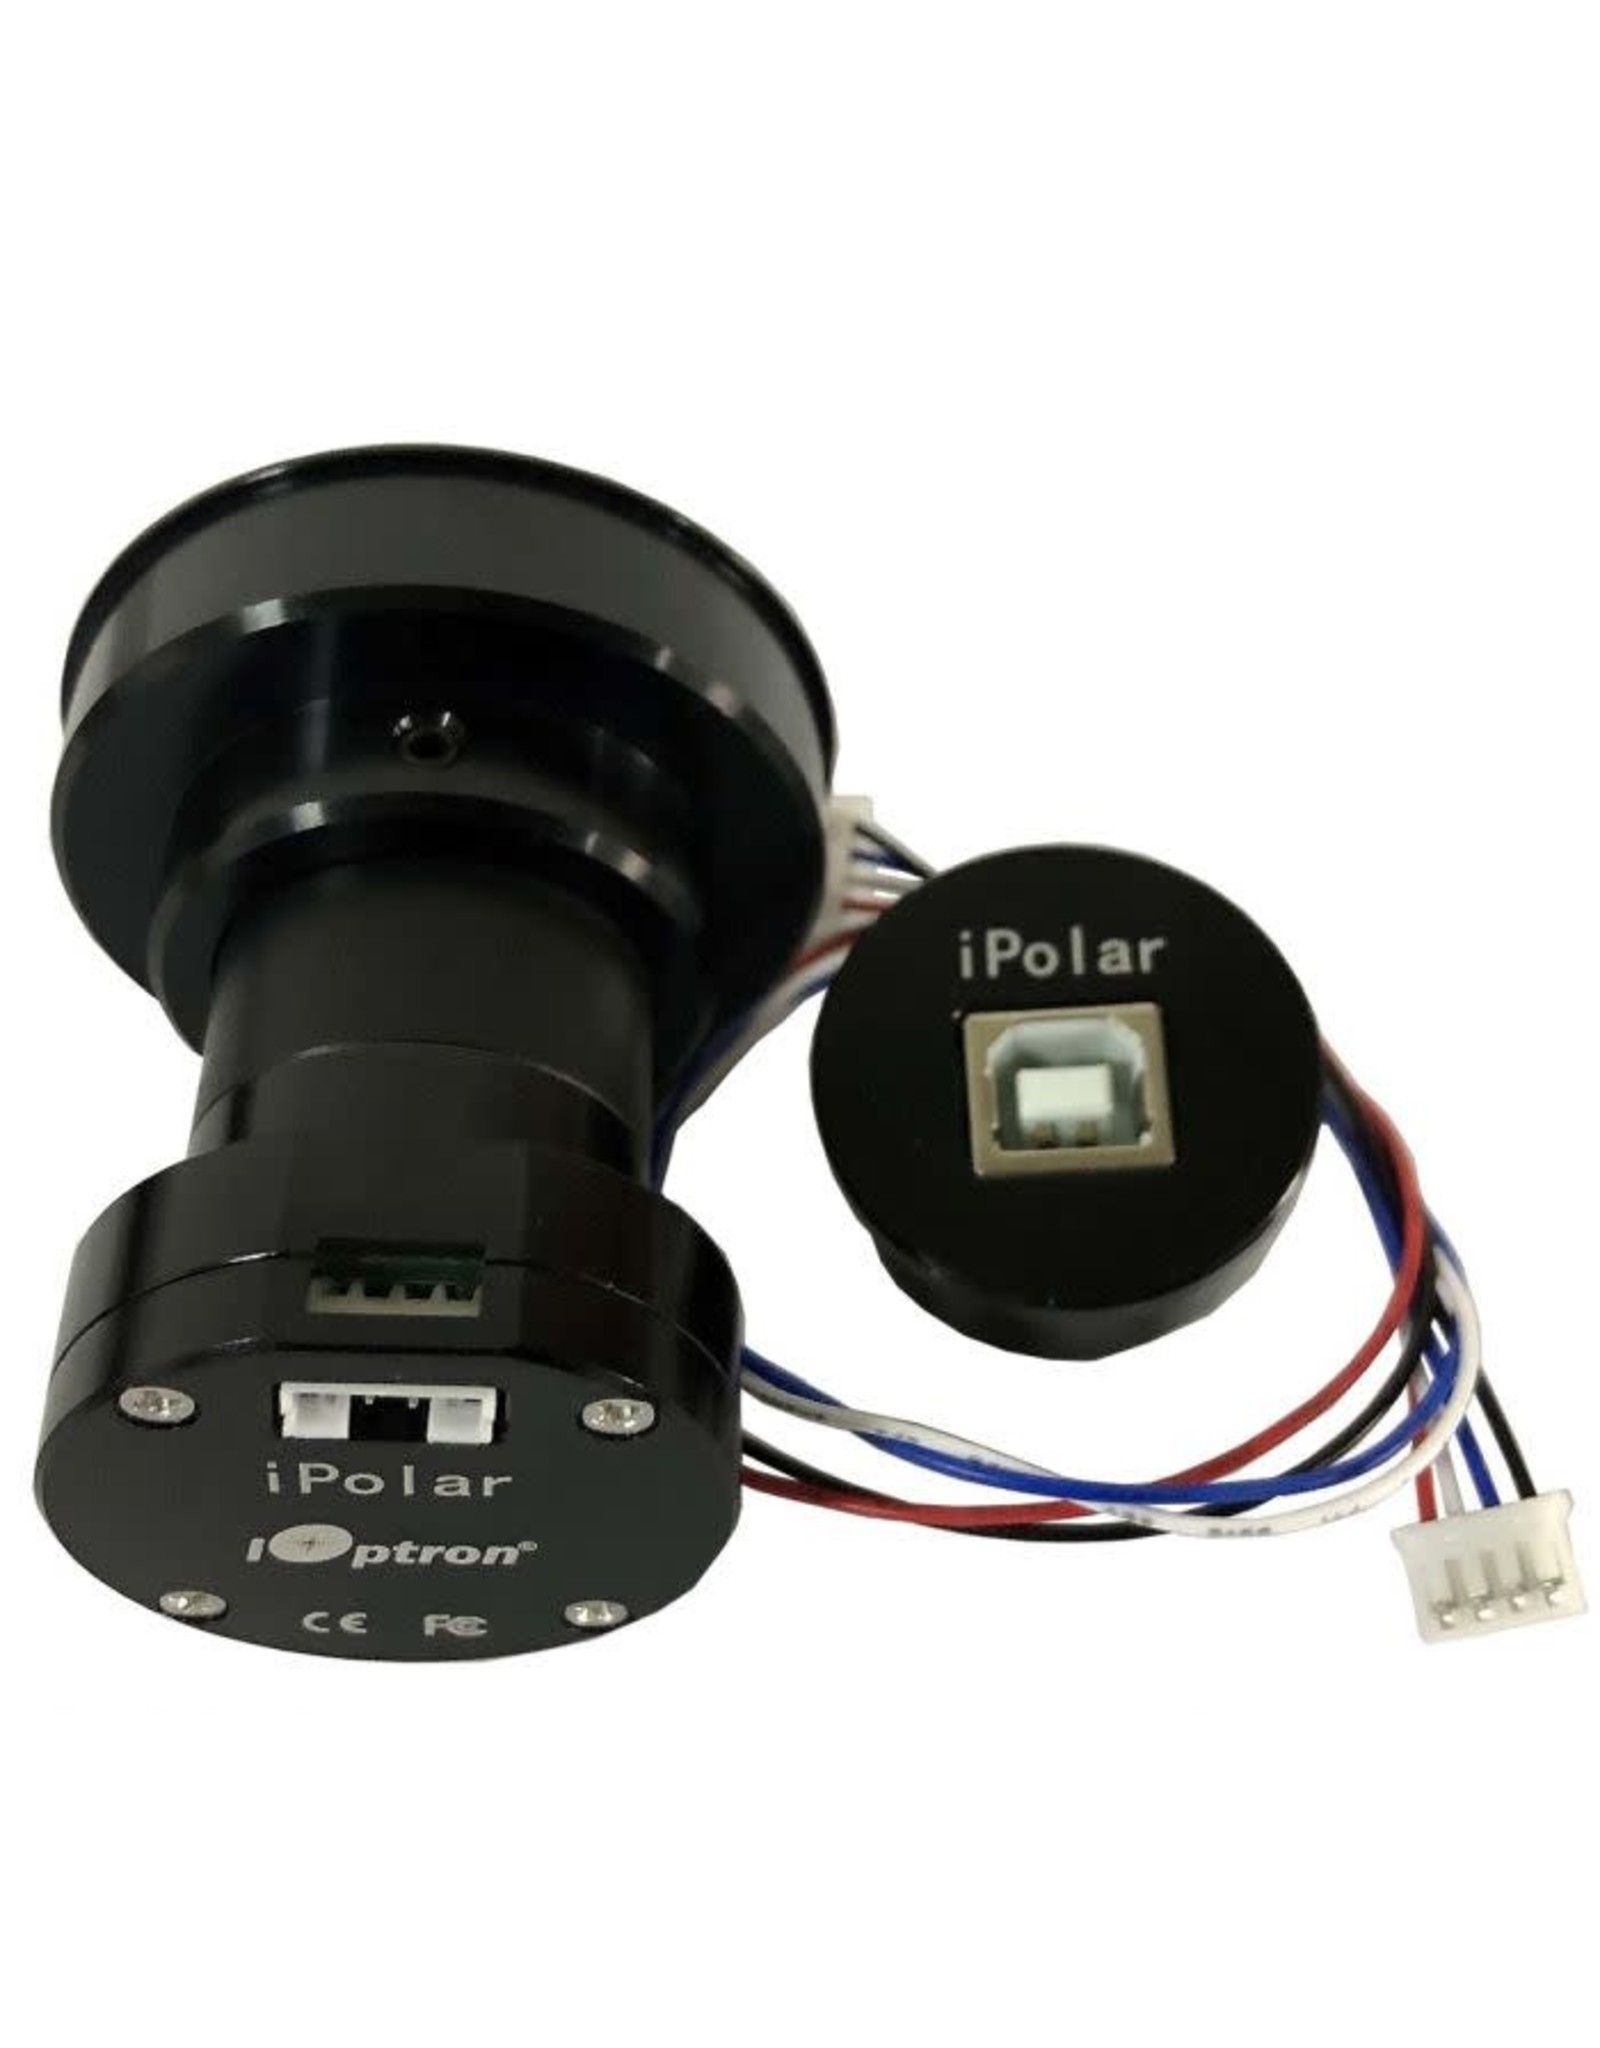 iOptron iOptron iPolar Electronic Polarscope with Adapter for Internal Mounting to CEM120 - 3339A-120